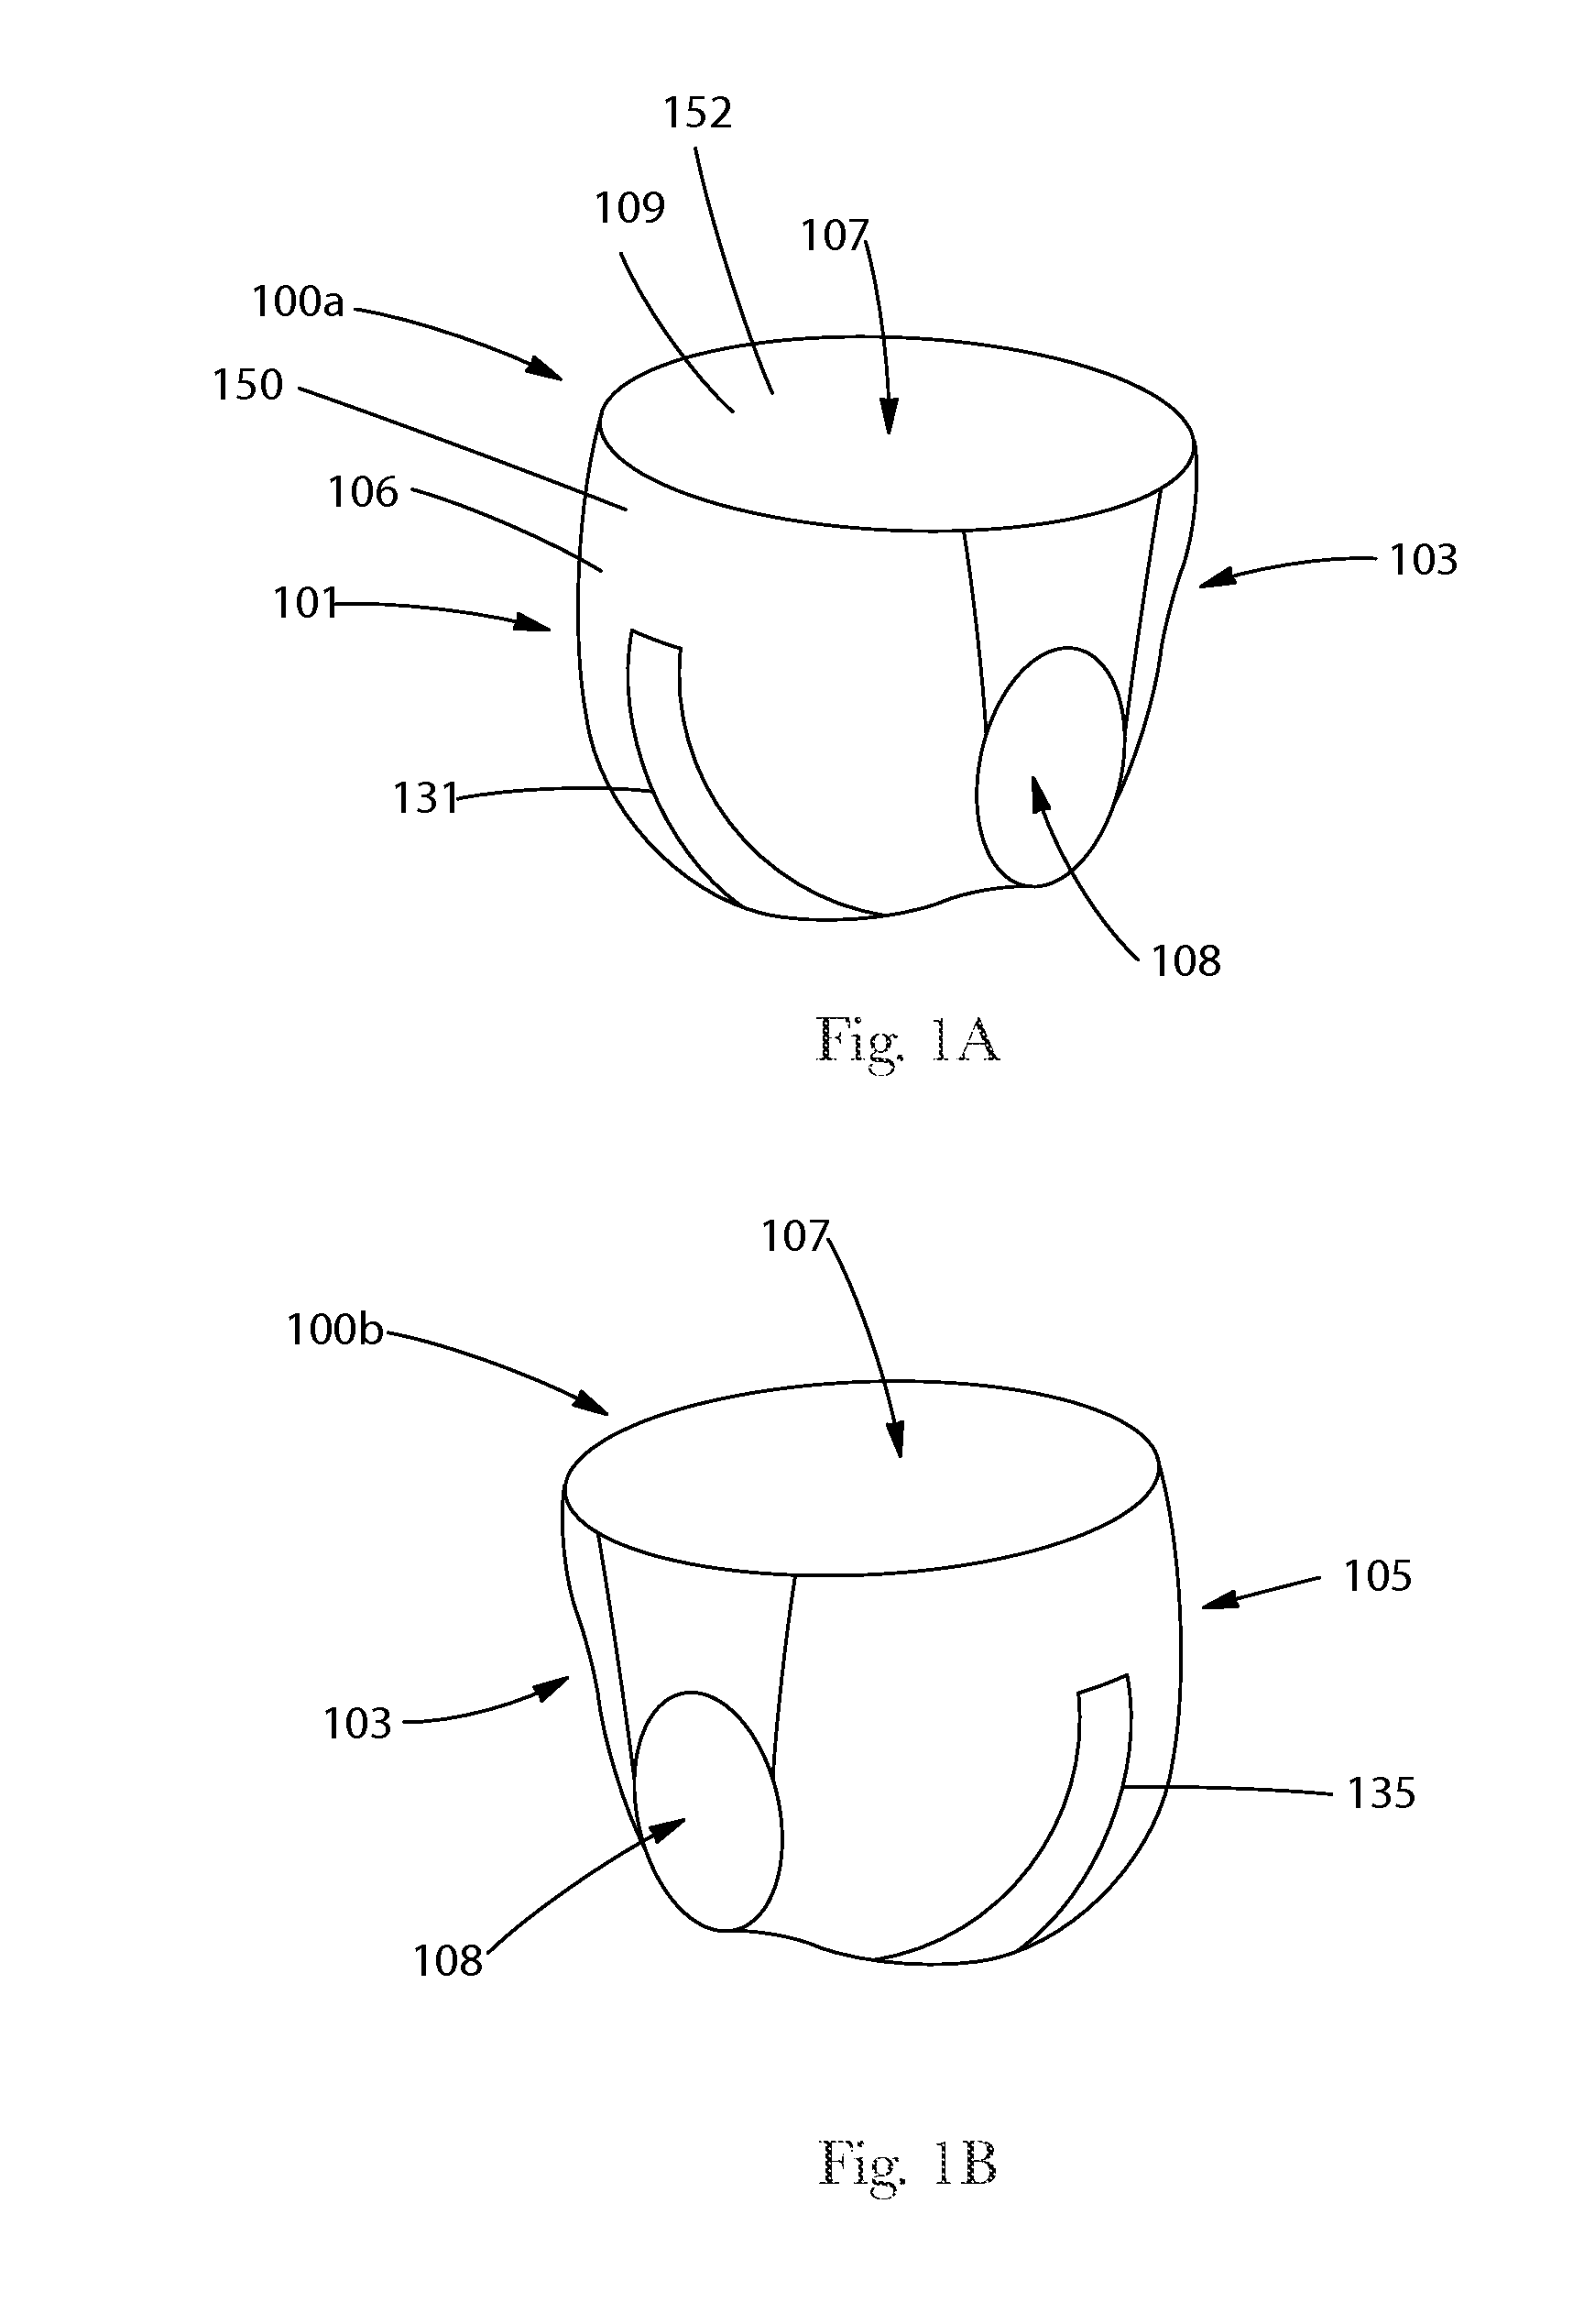 Sensor Systems Comprising Anti-Choking Features